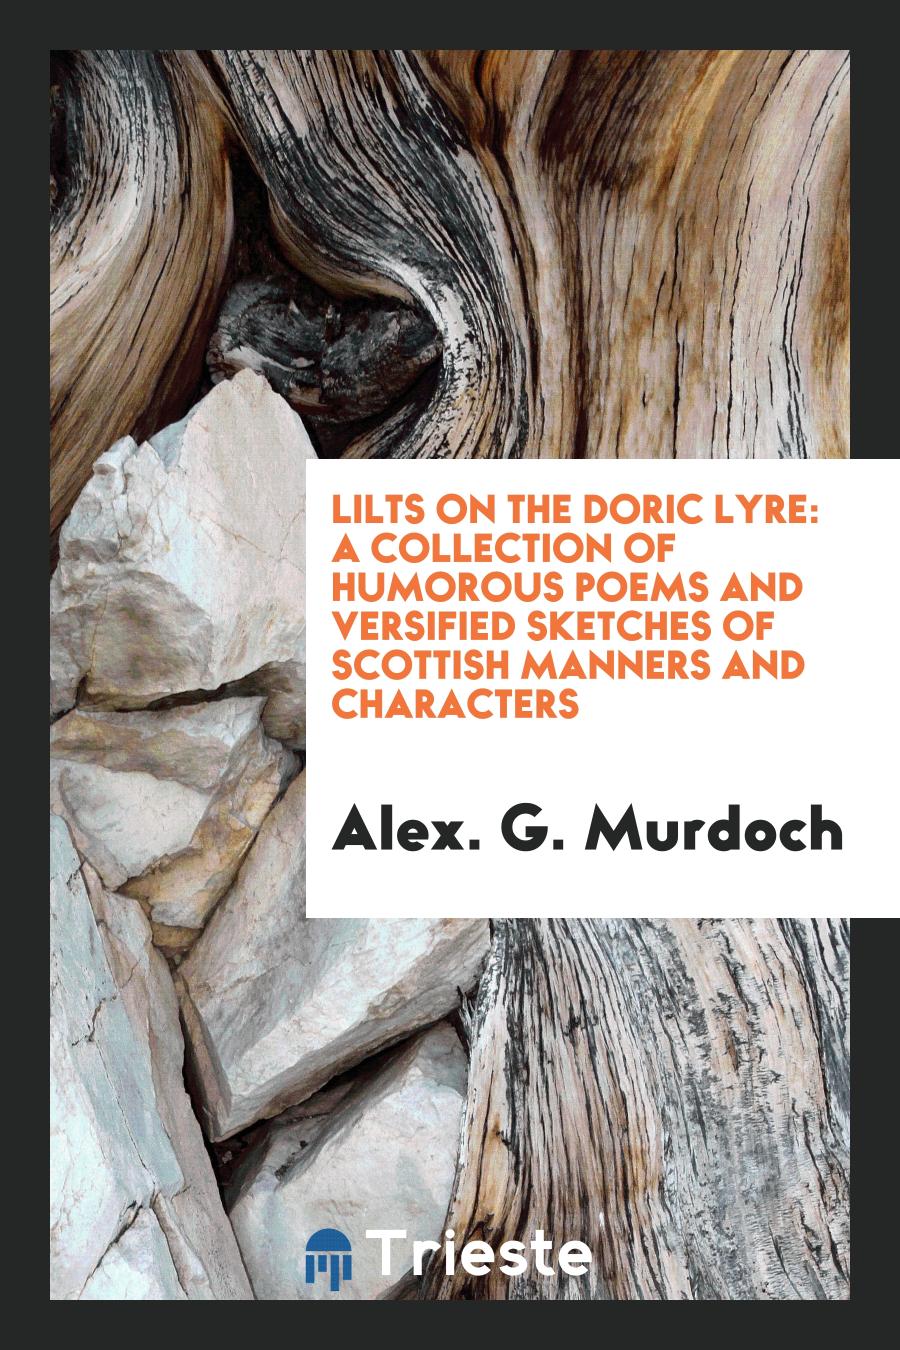 Lilts on the Doric Lyre: A Collection of Humorous Poems and Versified Sketches of Scottish Manners and Characters